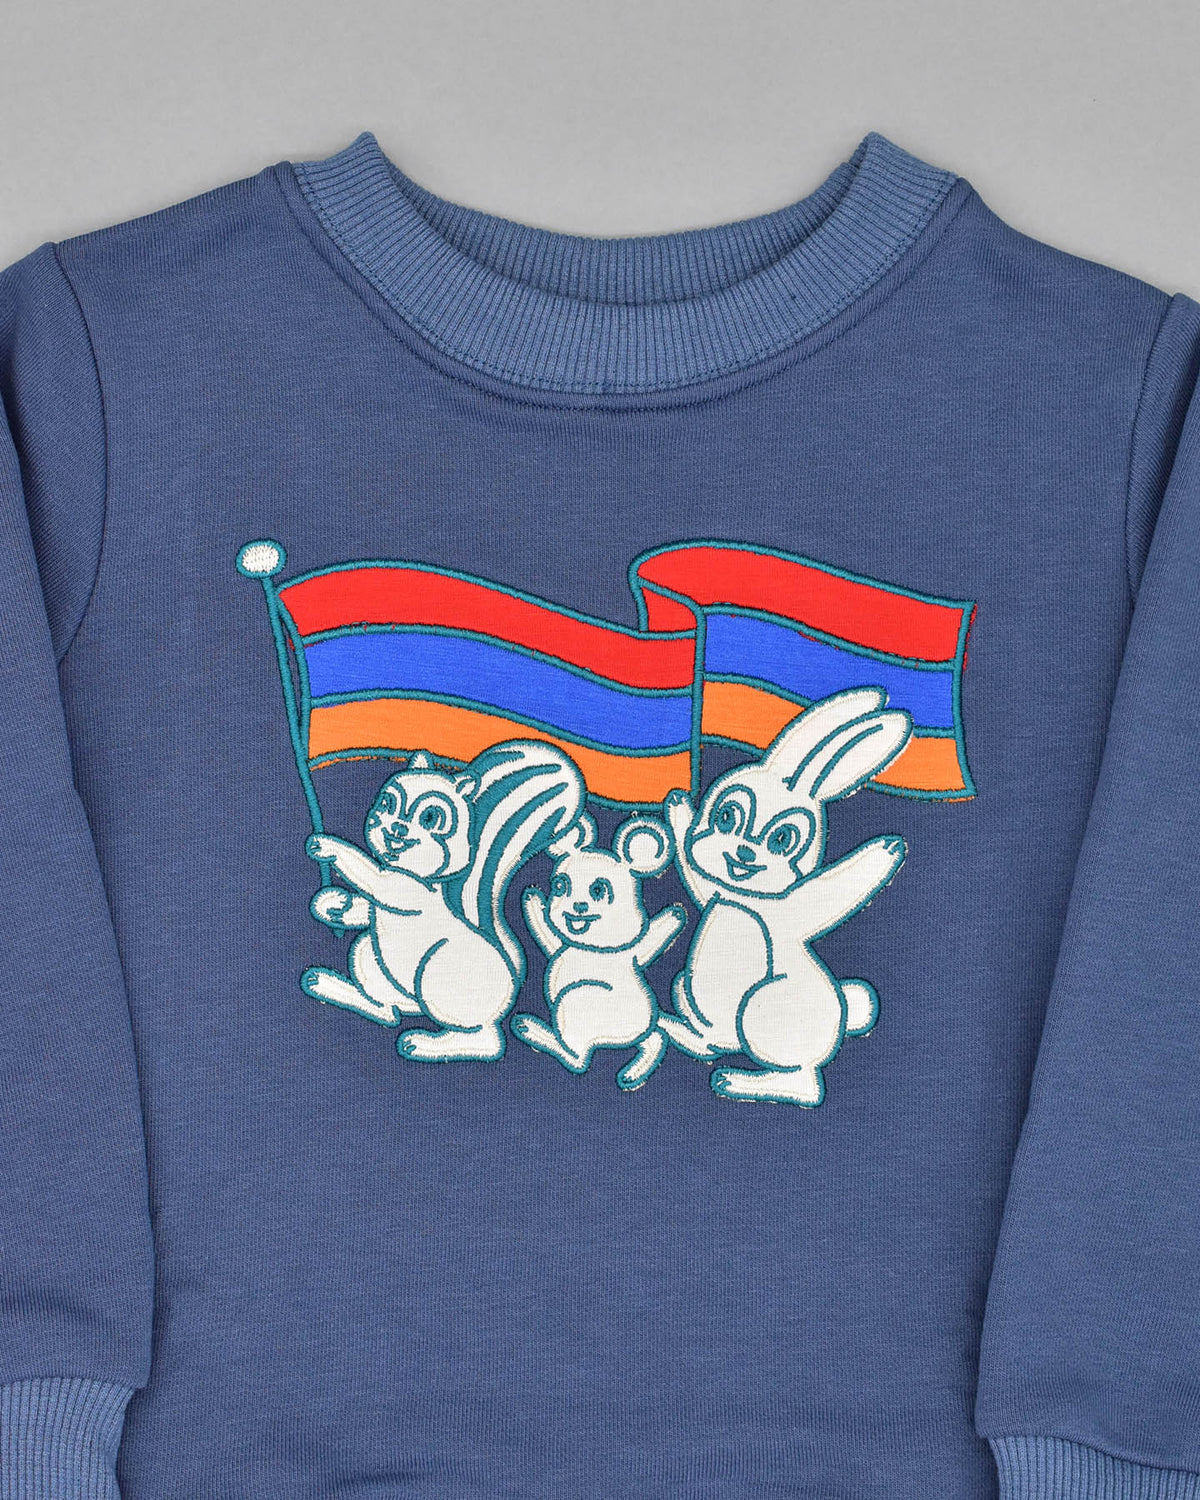 Armenian Critters Club Toddler Sweater